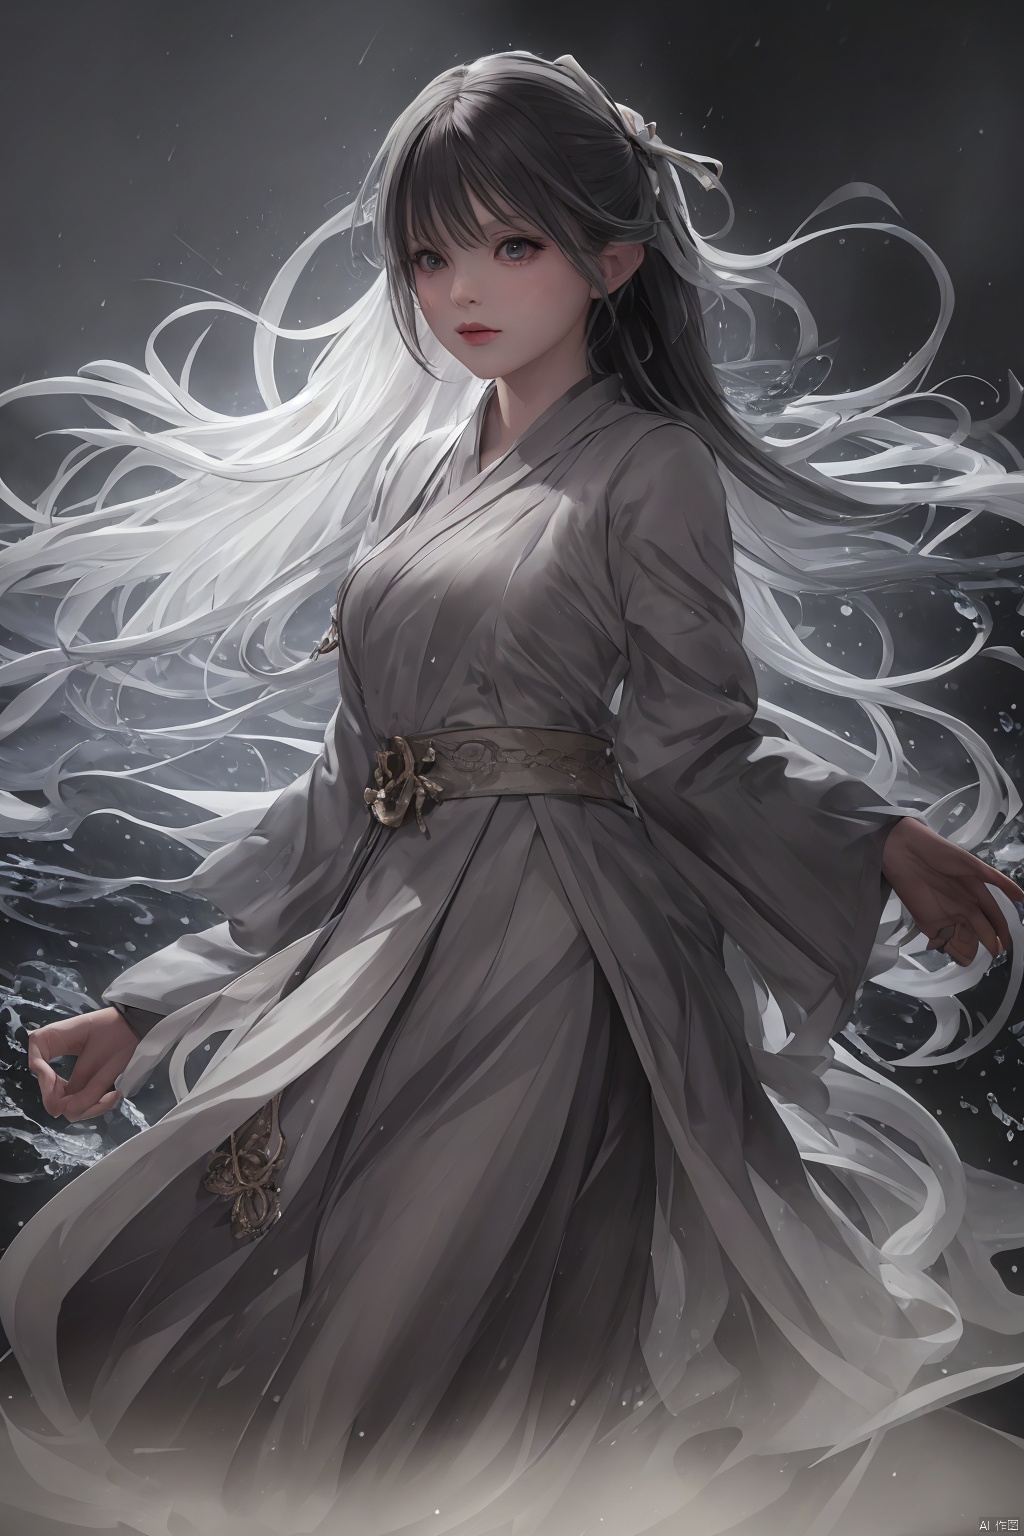  High detailed, masterpiece, Cowboy lens, 1 girl, solo, female focus, Gray hair: 1.4, long hair, ponytail, （Black, Hanfu|kimono）, Suspended water waves:1.35, Water Droplet Splash:1.35, (In the rain：1.35), /（Suspension), /, Hold a sword in hand: 1.31/(swords.), Blade, / Sword hilt, scabbard, Depodh) /, special effects, holographic display, fine gloss, full length shot, Oil painting texture, (Black Background: 1.3), lamer, Outdoor, light master, ray tracing：1.2, reflection light：1.25, Contrast ratio: 1.1, 3D, Futurism, anaglyph, Surrealism, motion blur, cinematic lighting, motion lines, Depth of field, ray tracing, sparkle, UHD, 8K, best quality, textured skin, 1080P, ccurate, splash water